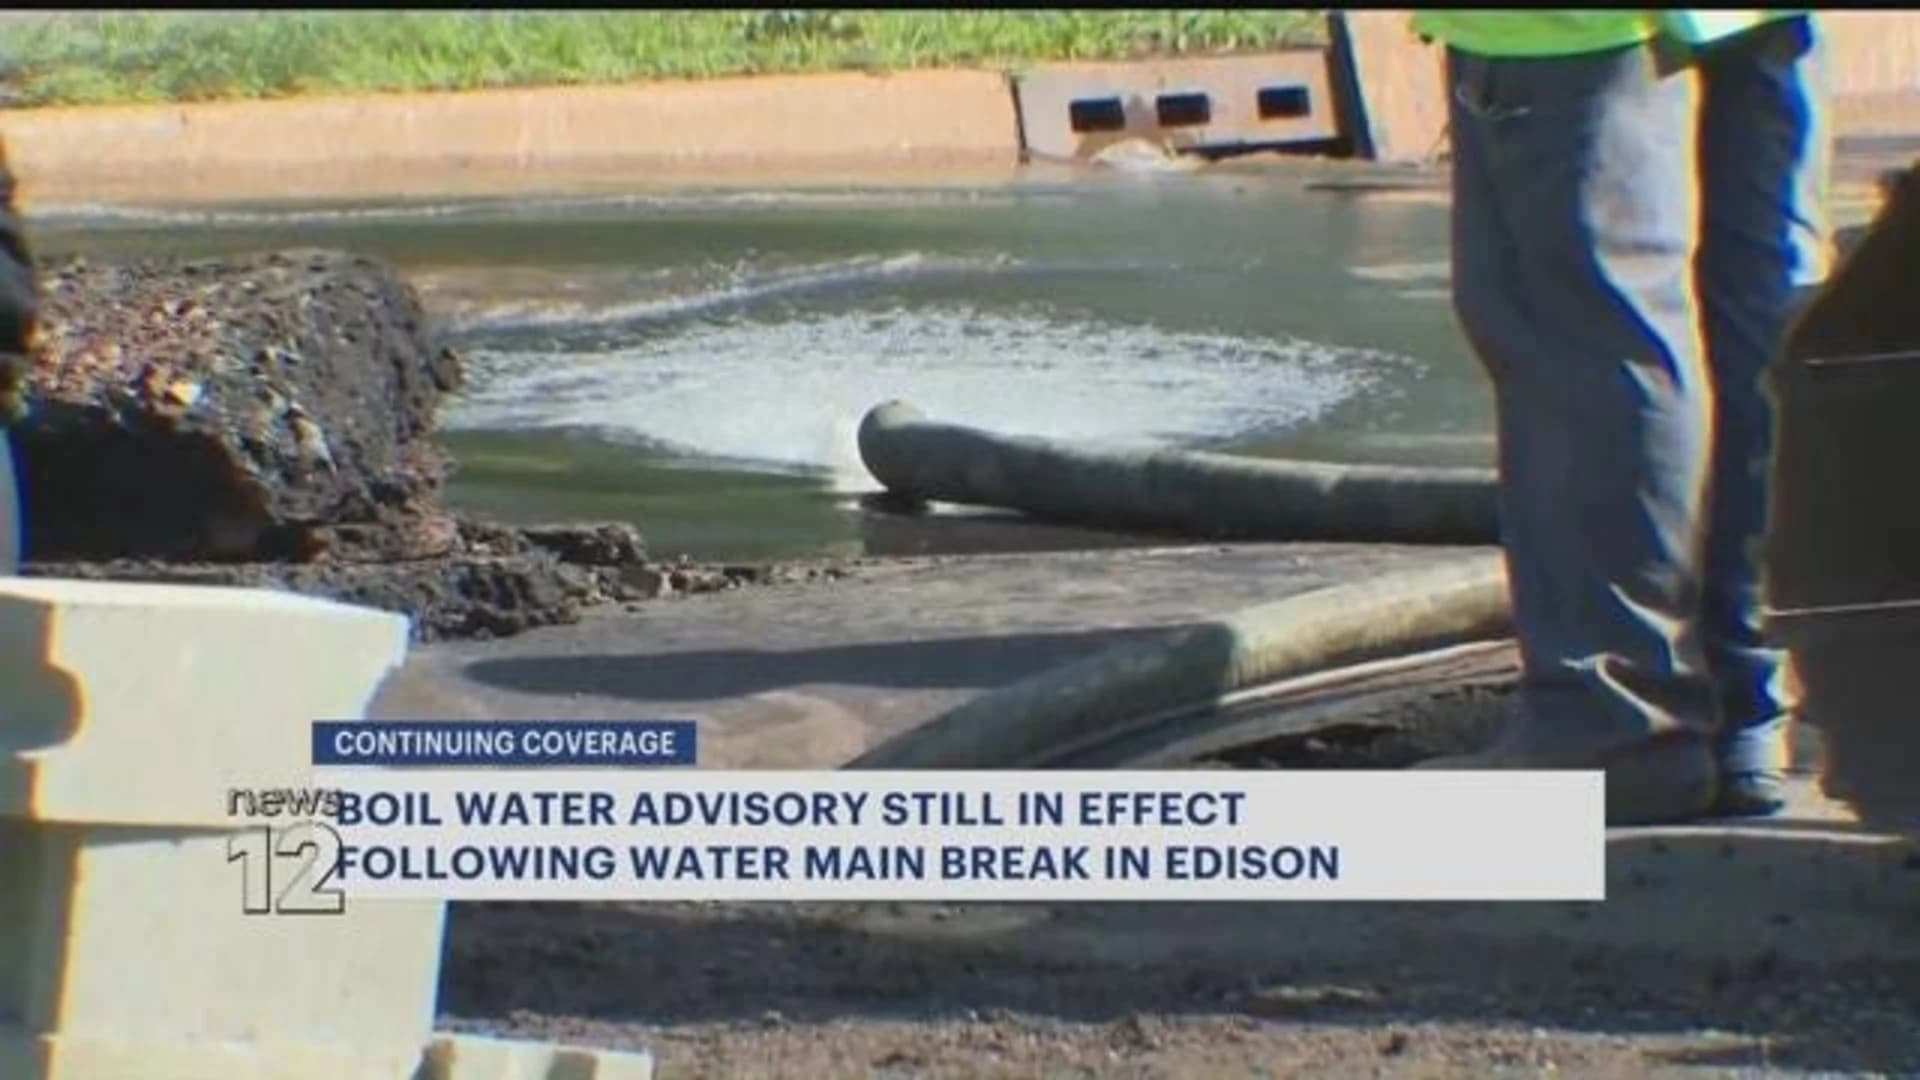 Boil water advisory remains in place following large water main break in Edison